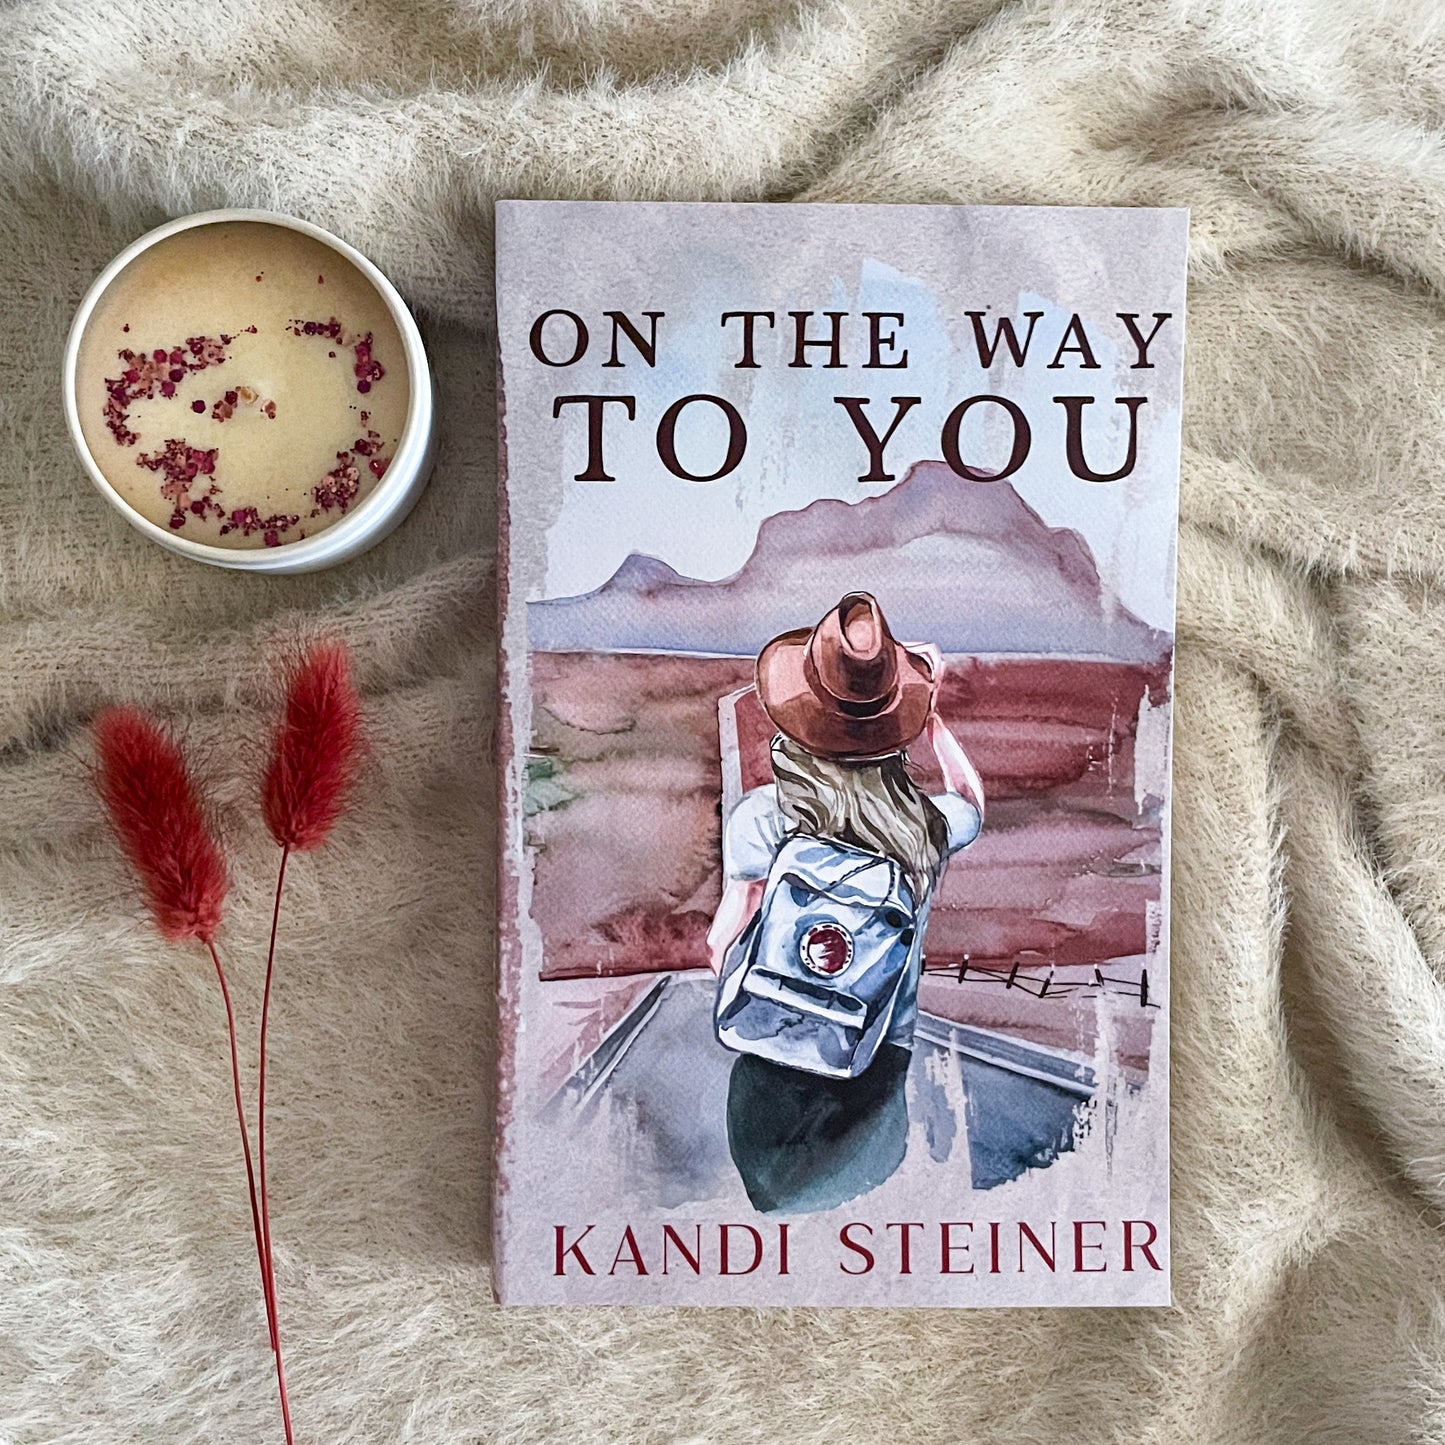 On the Way to You (Special Edition) by Kandi Steiner